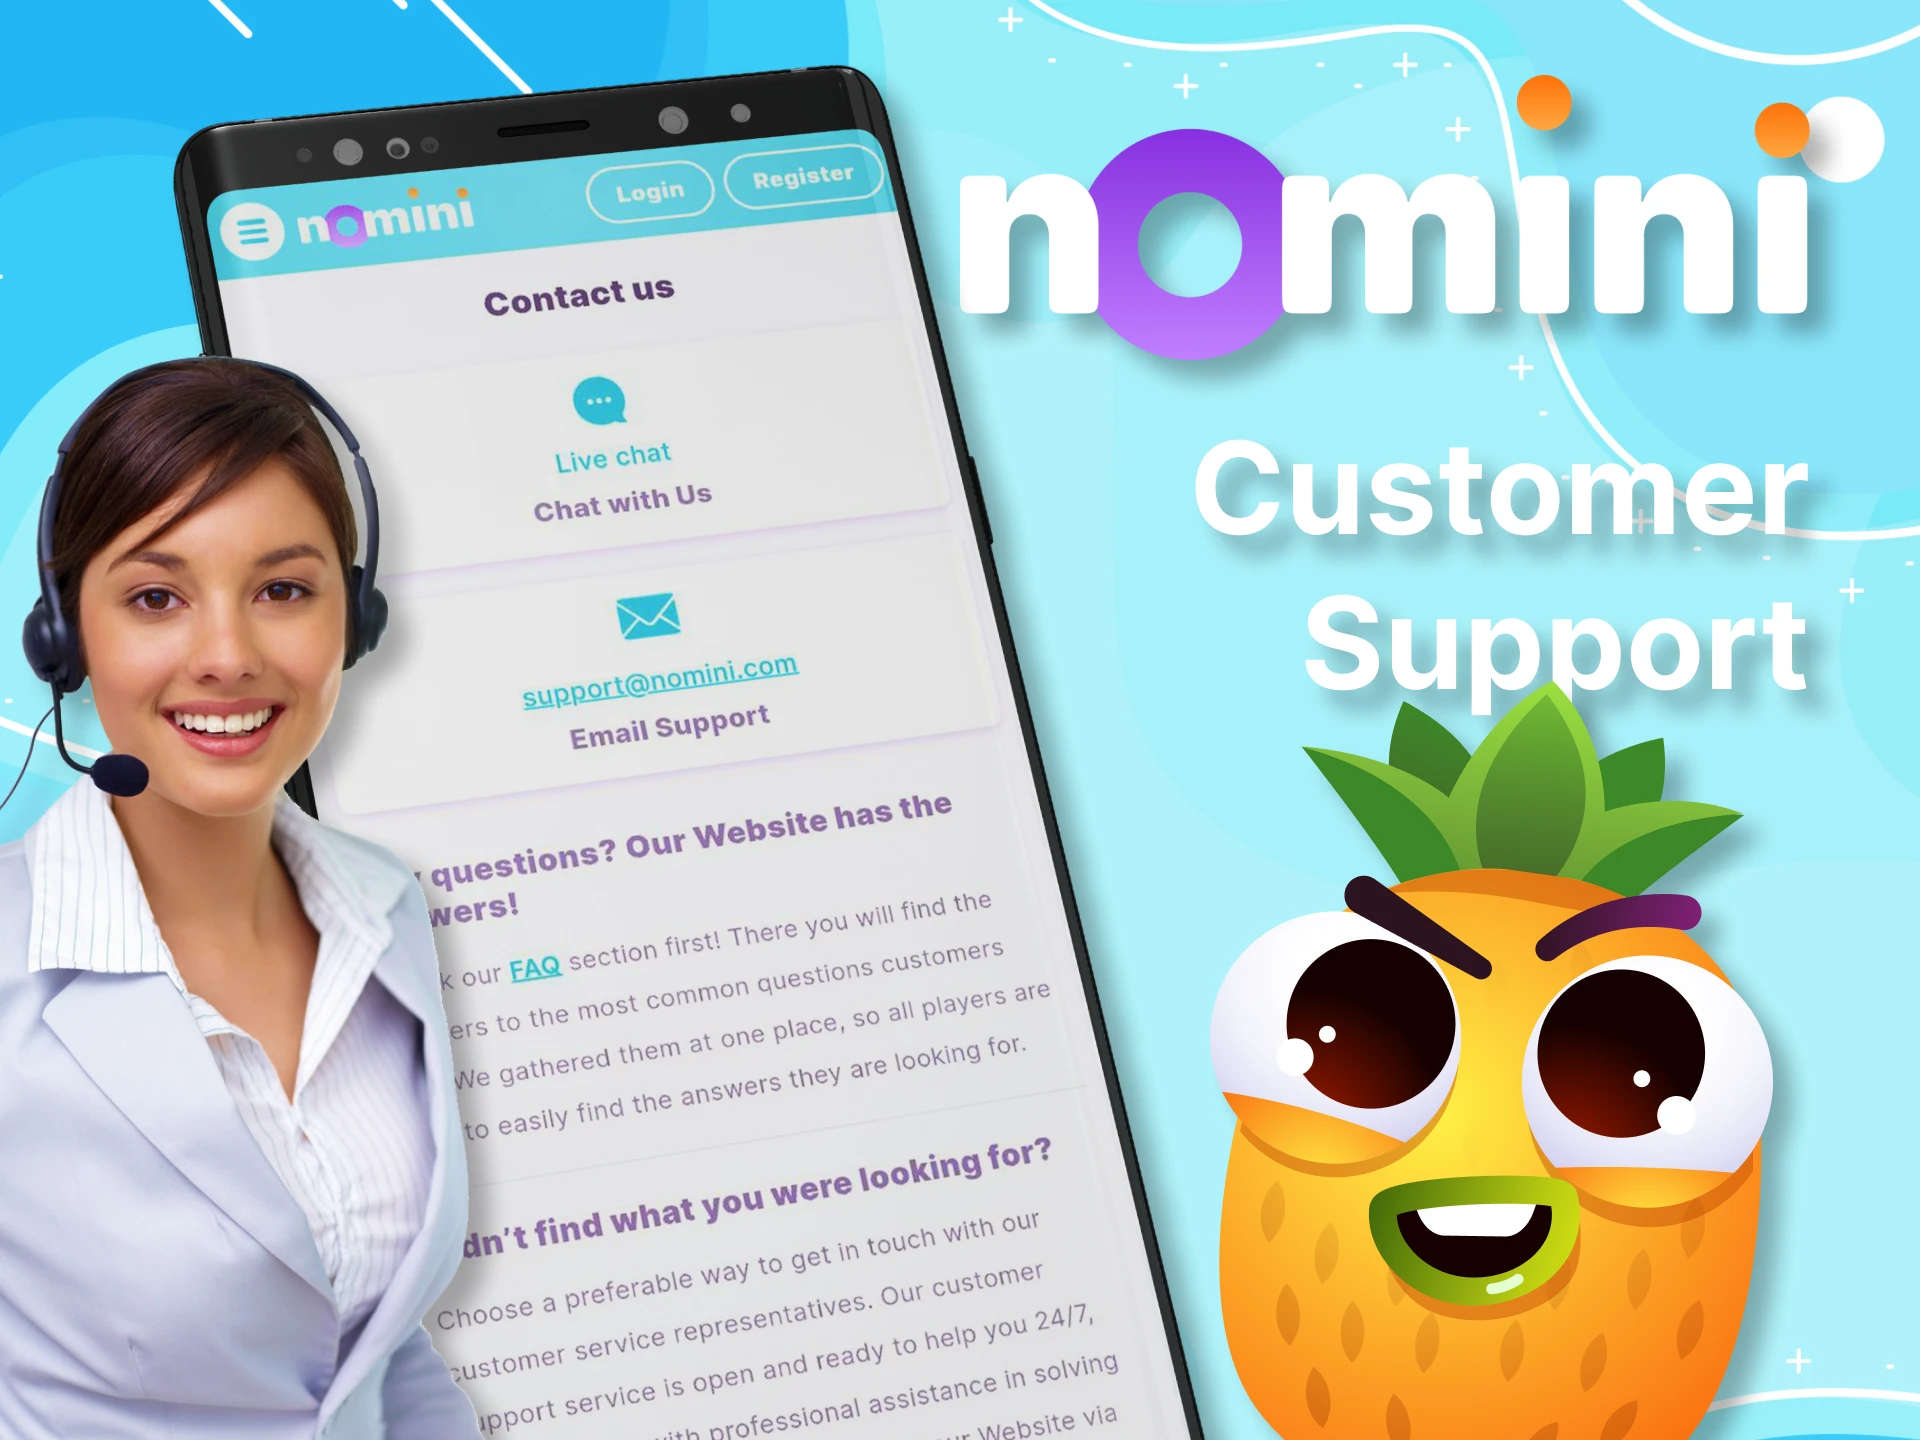 In the Nomini app you can always count on the support of the service.